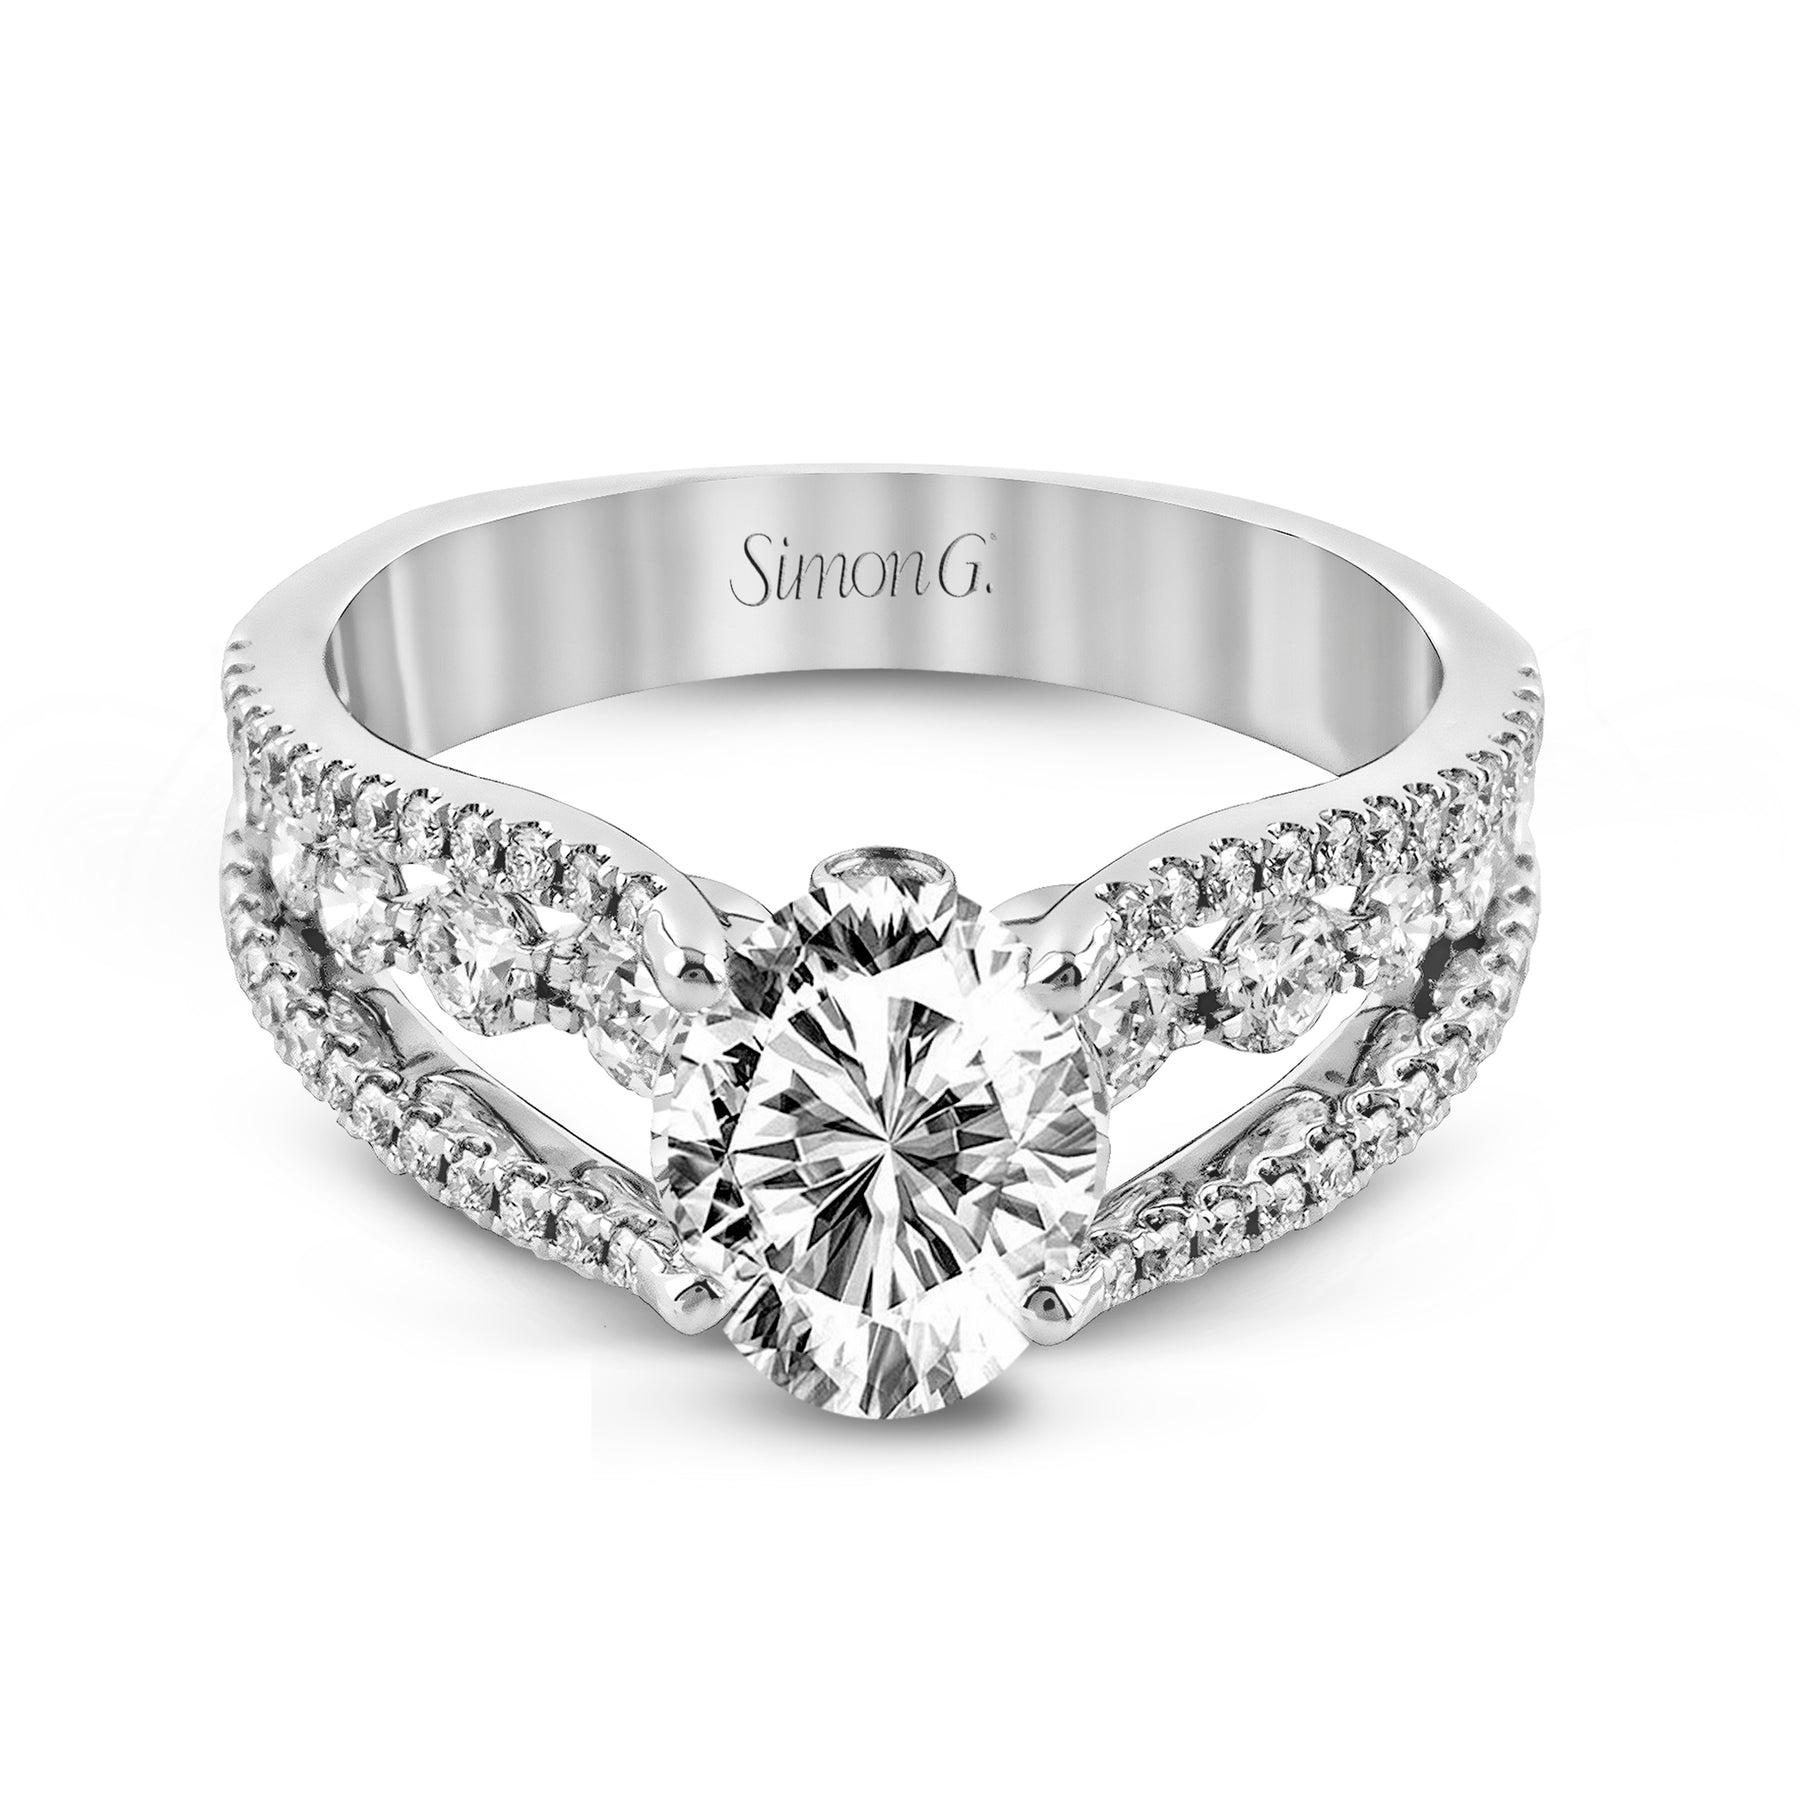 Oval-Cut Split-Shank Engagement Ring In 18k Gold With Diamonds MR2248-OV